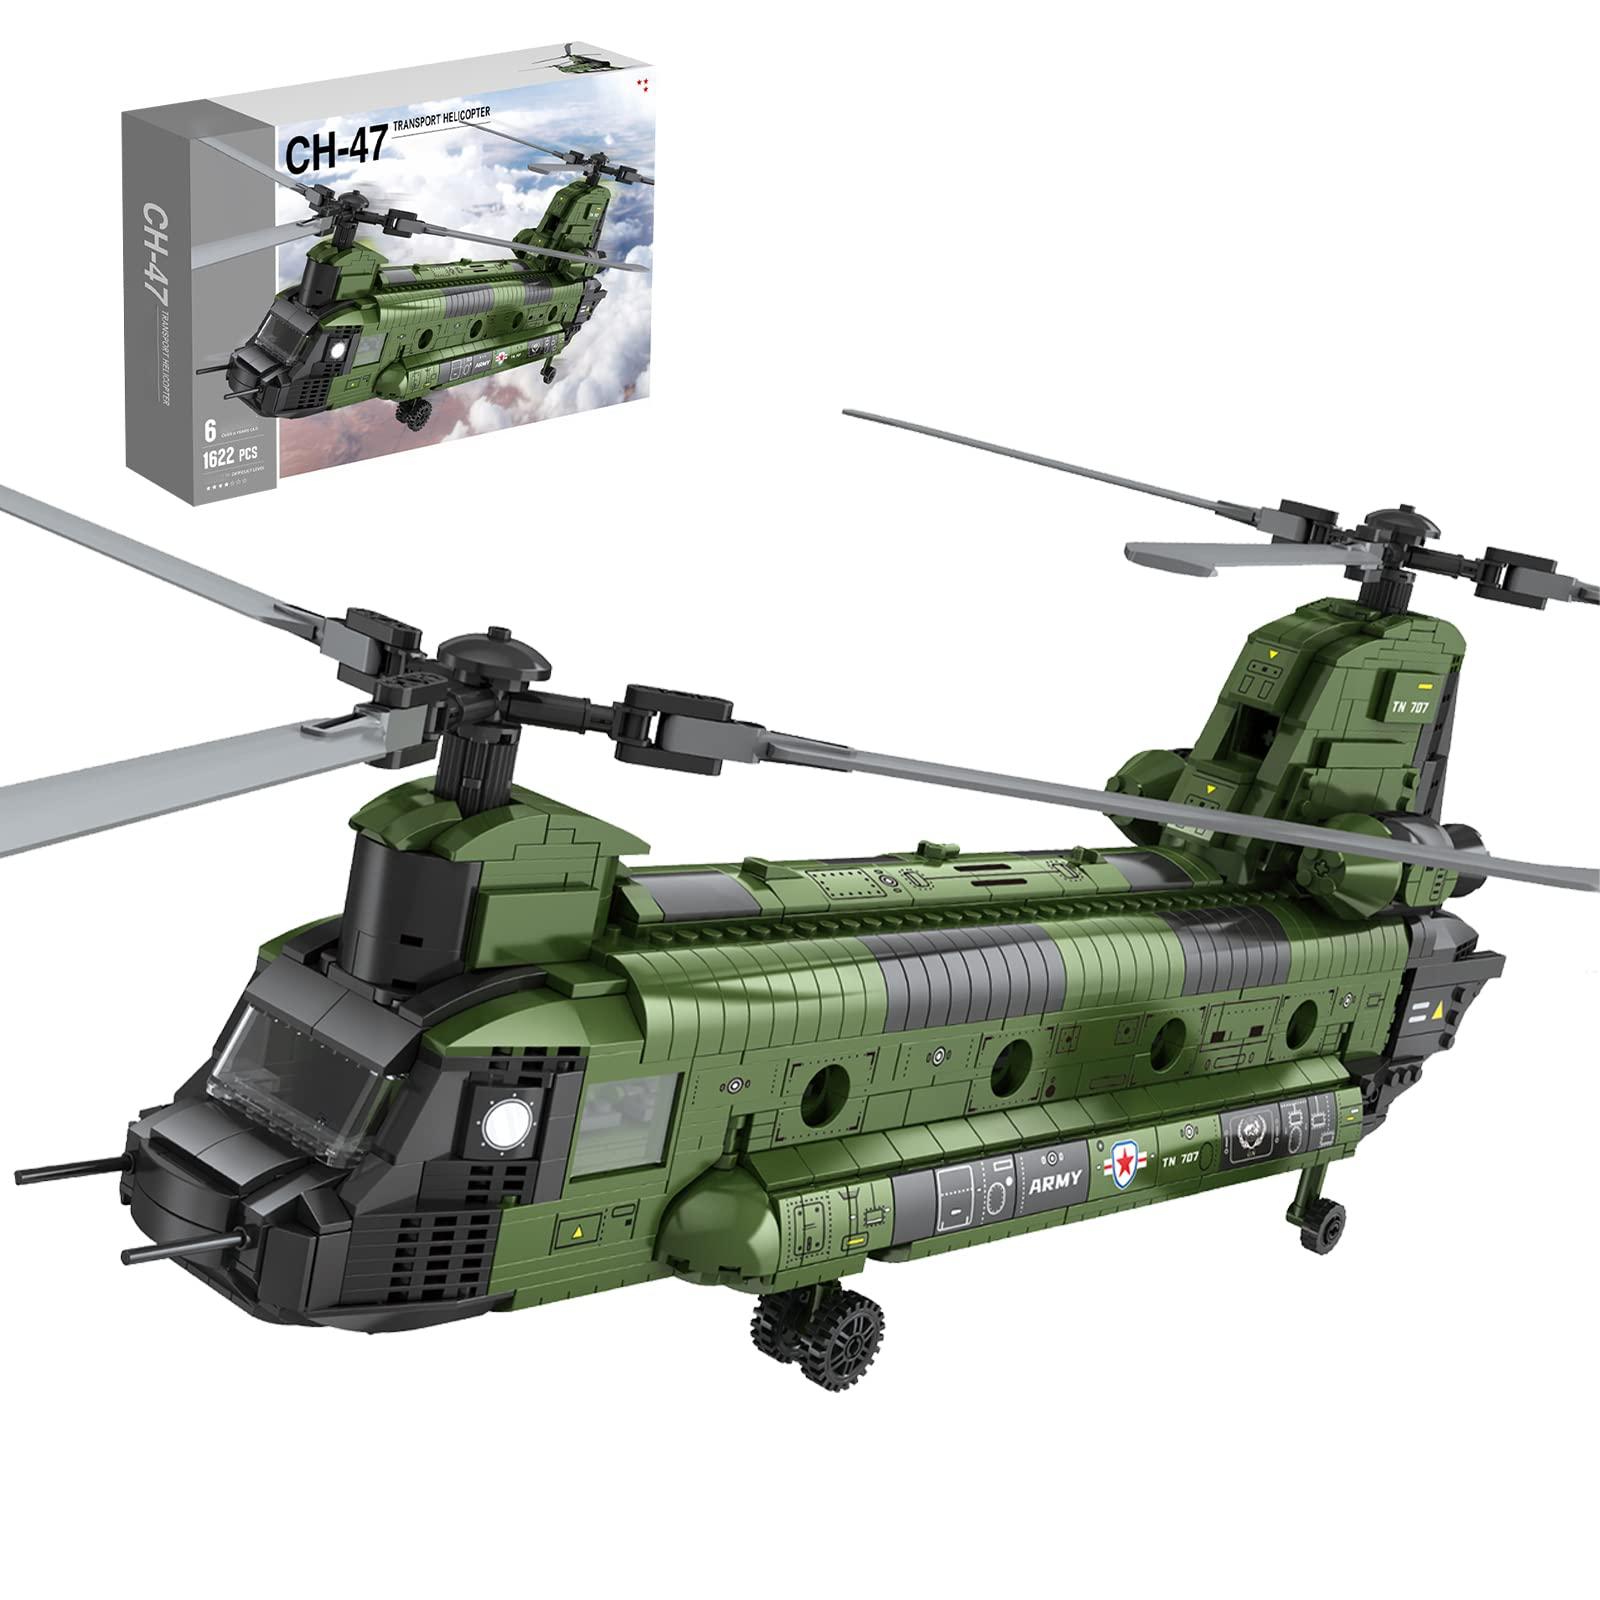 Chinook Hubschrauber Rc: Endless possibilities with Chinook helicopter RC model